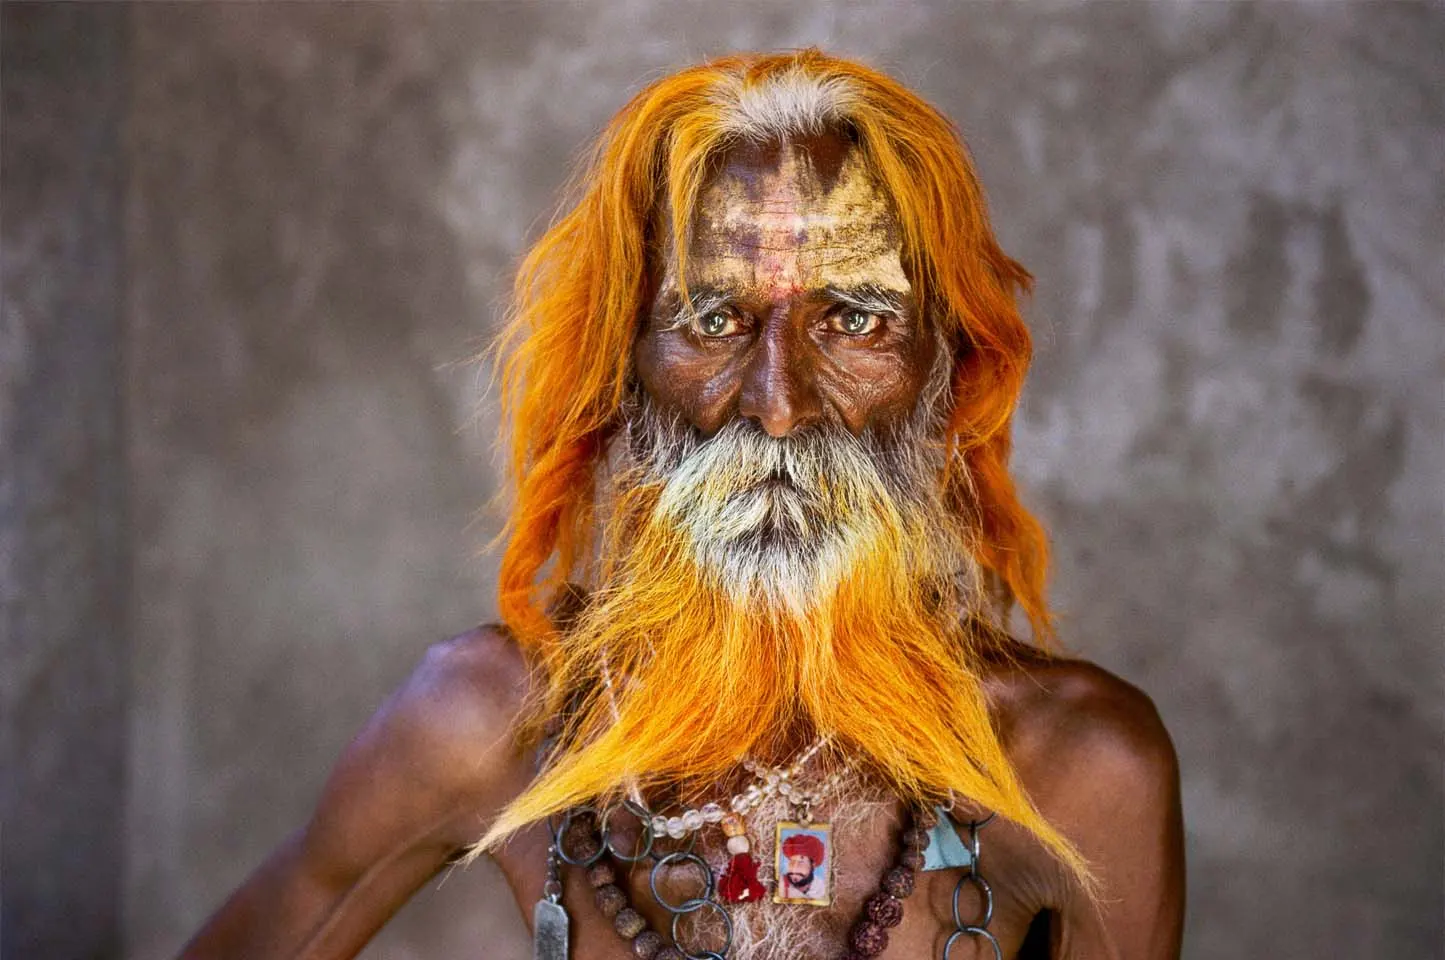 AWARD-WINNING PHOTOGRAPHER - Steve McCurry ICONS in Chicago: A Photography Exhibit